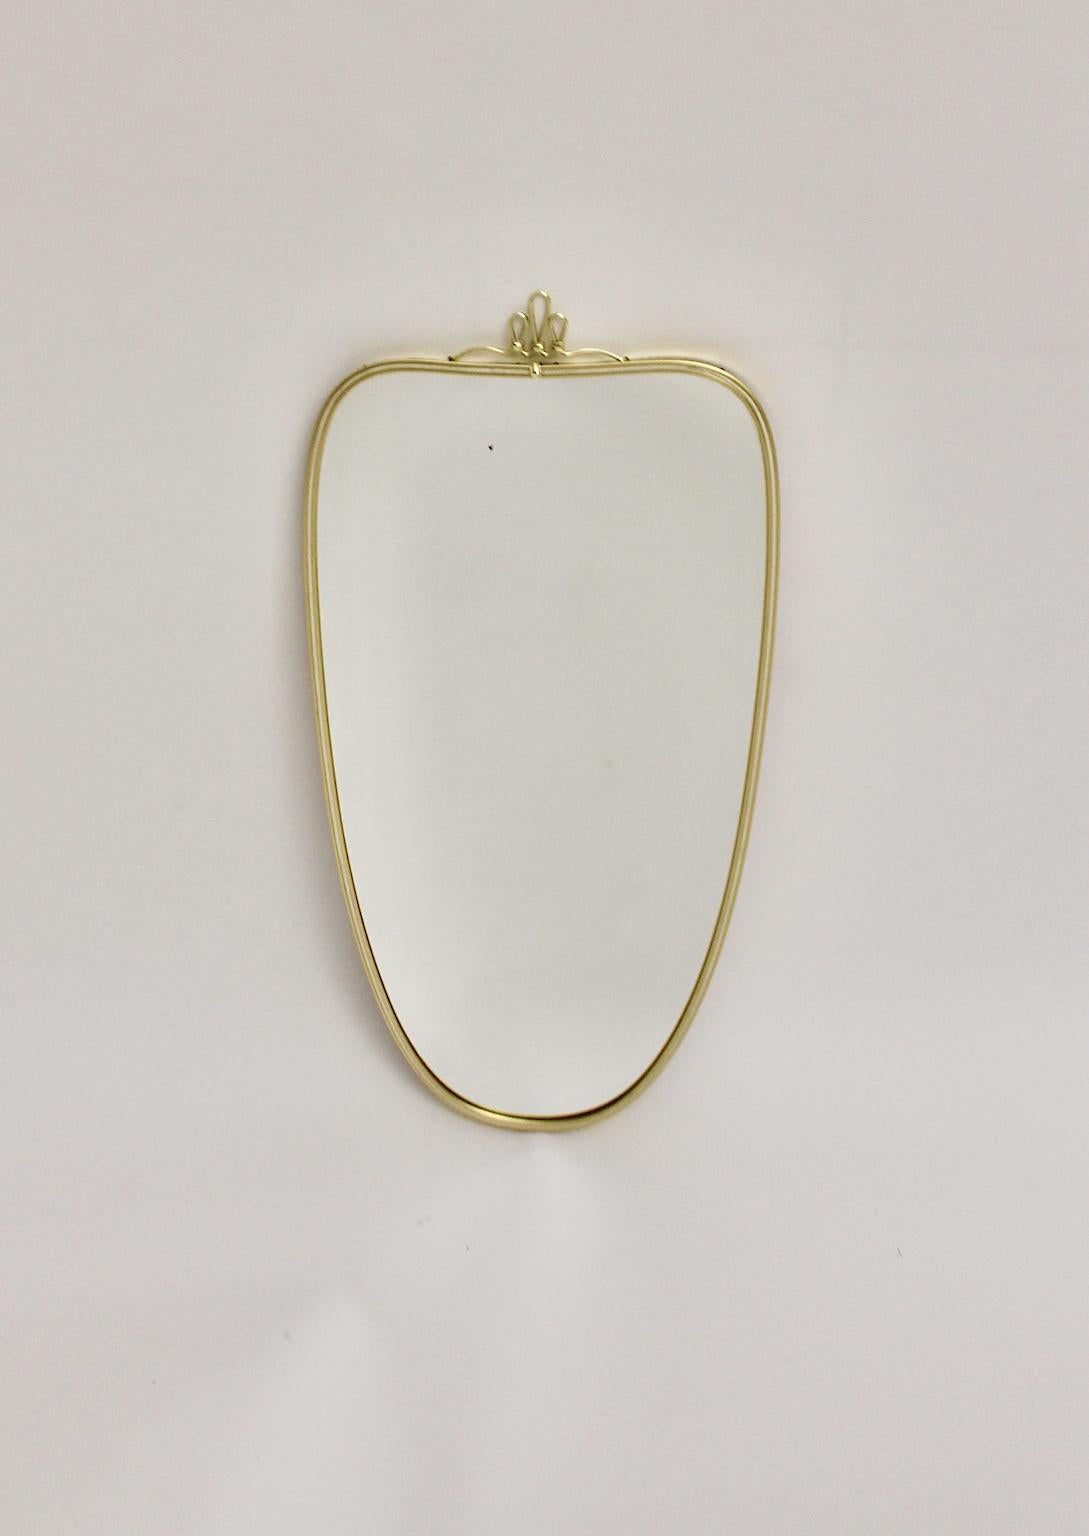 Italian Modernist Vintage Oval Golden Metal Wall Mirror 1950s Italy For Sale